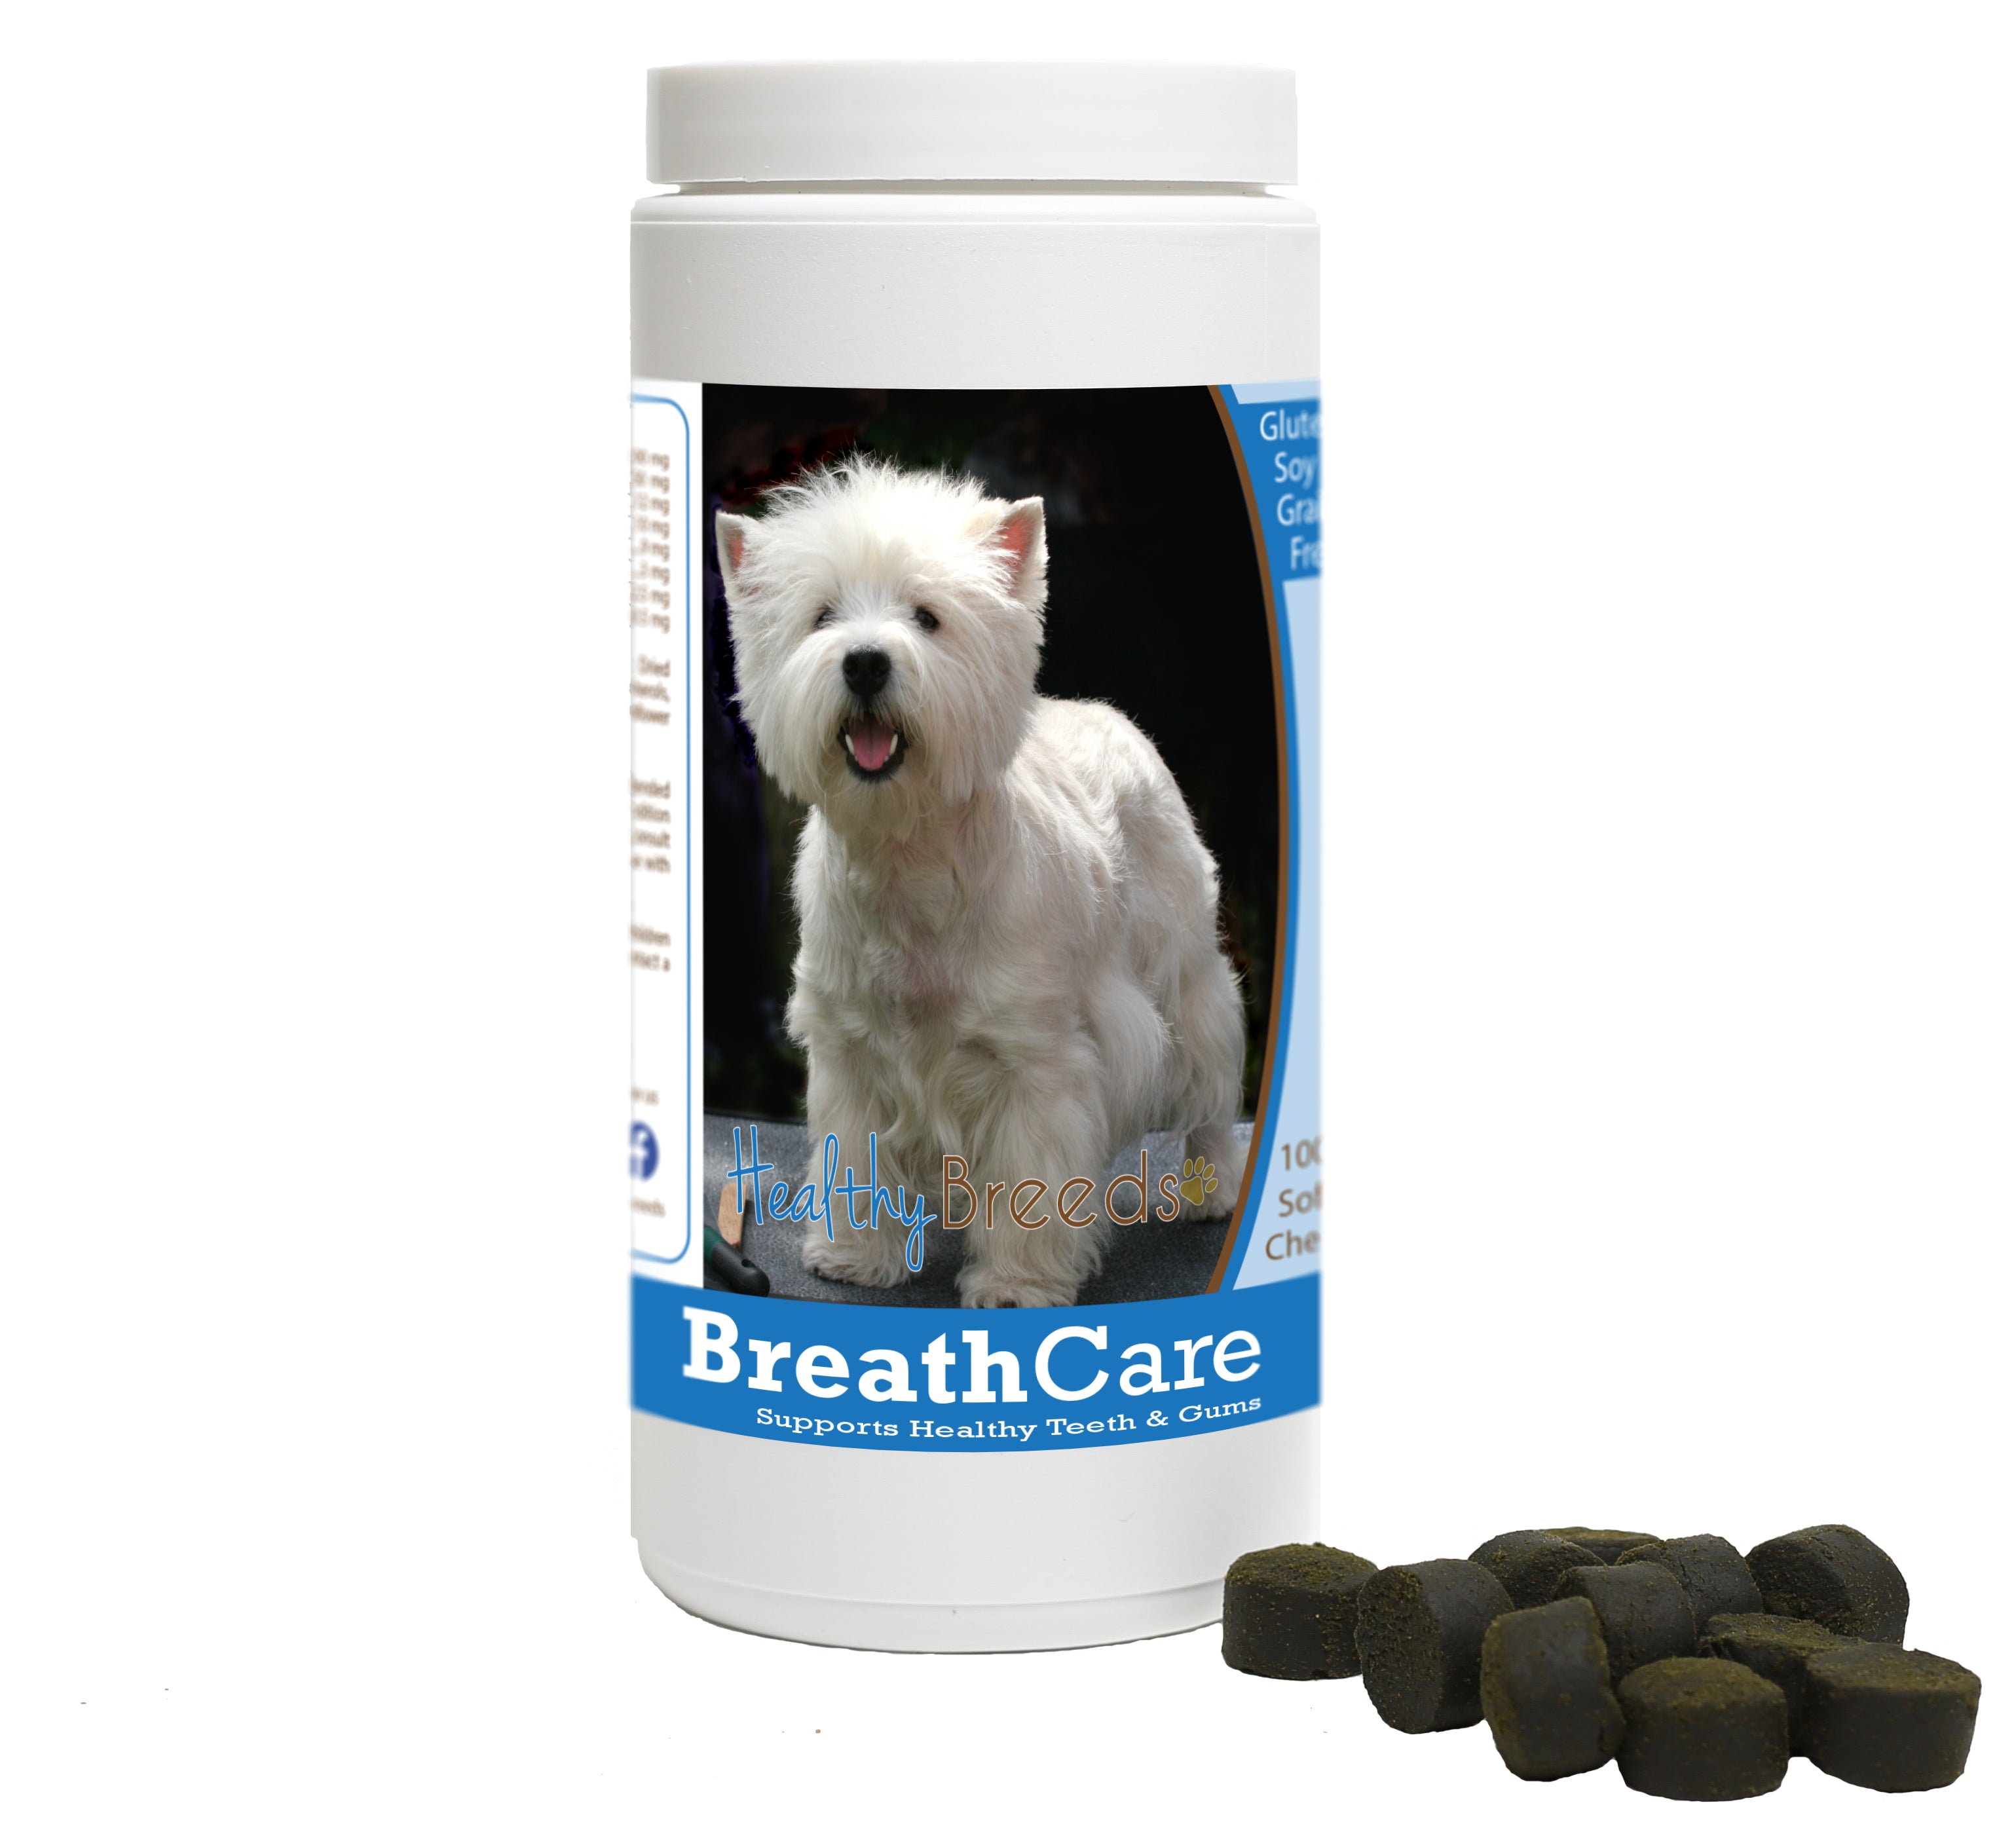 West Highland White Terrier Breath Care Soft Chews for Dogs 60 Count